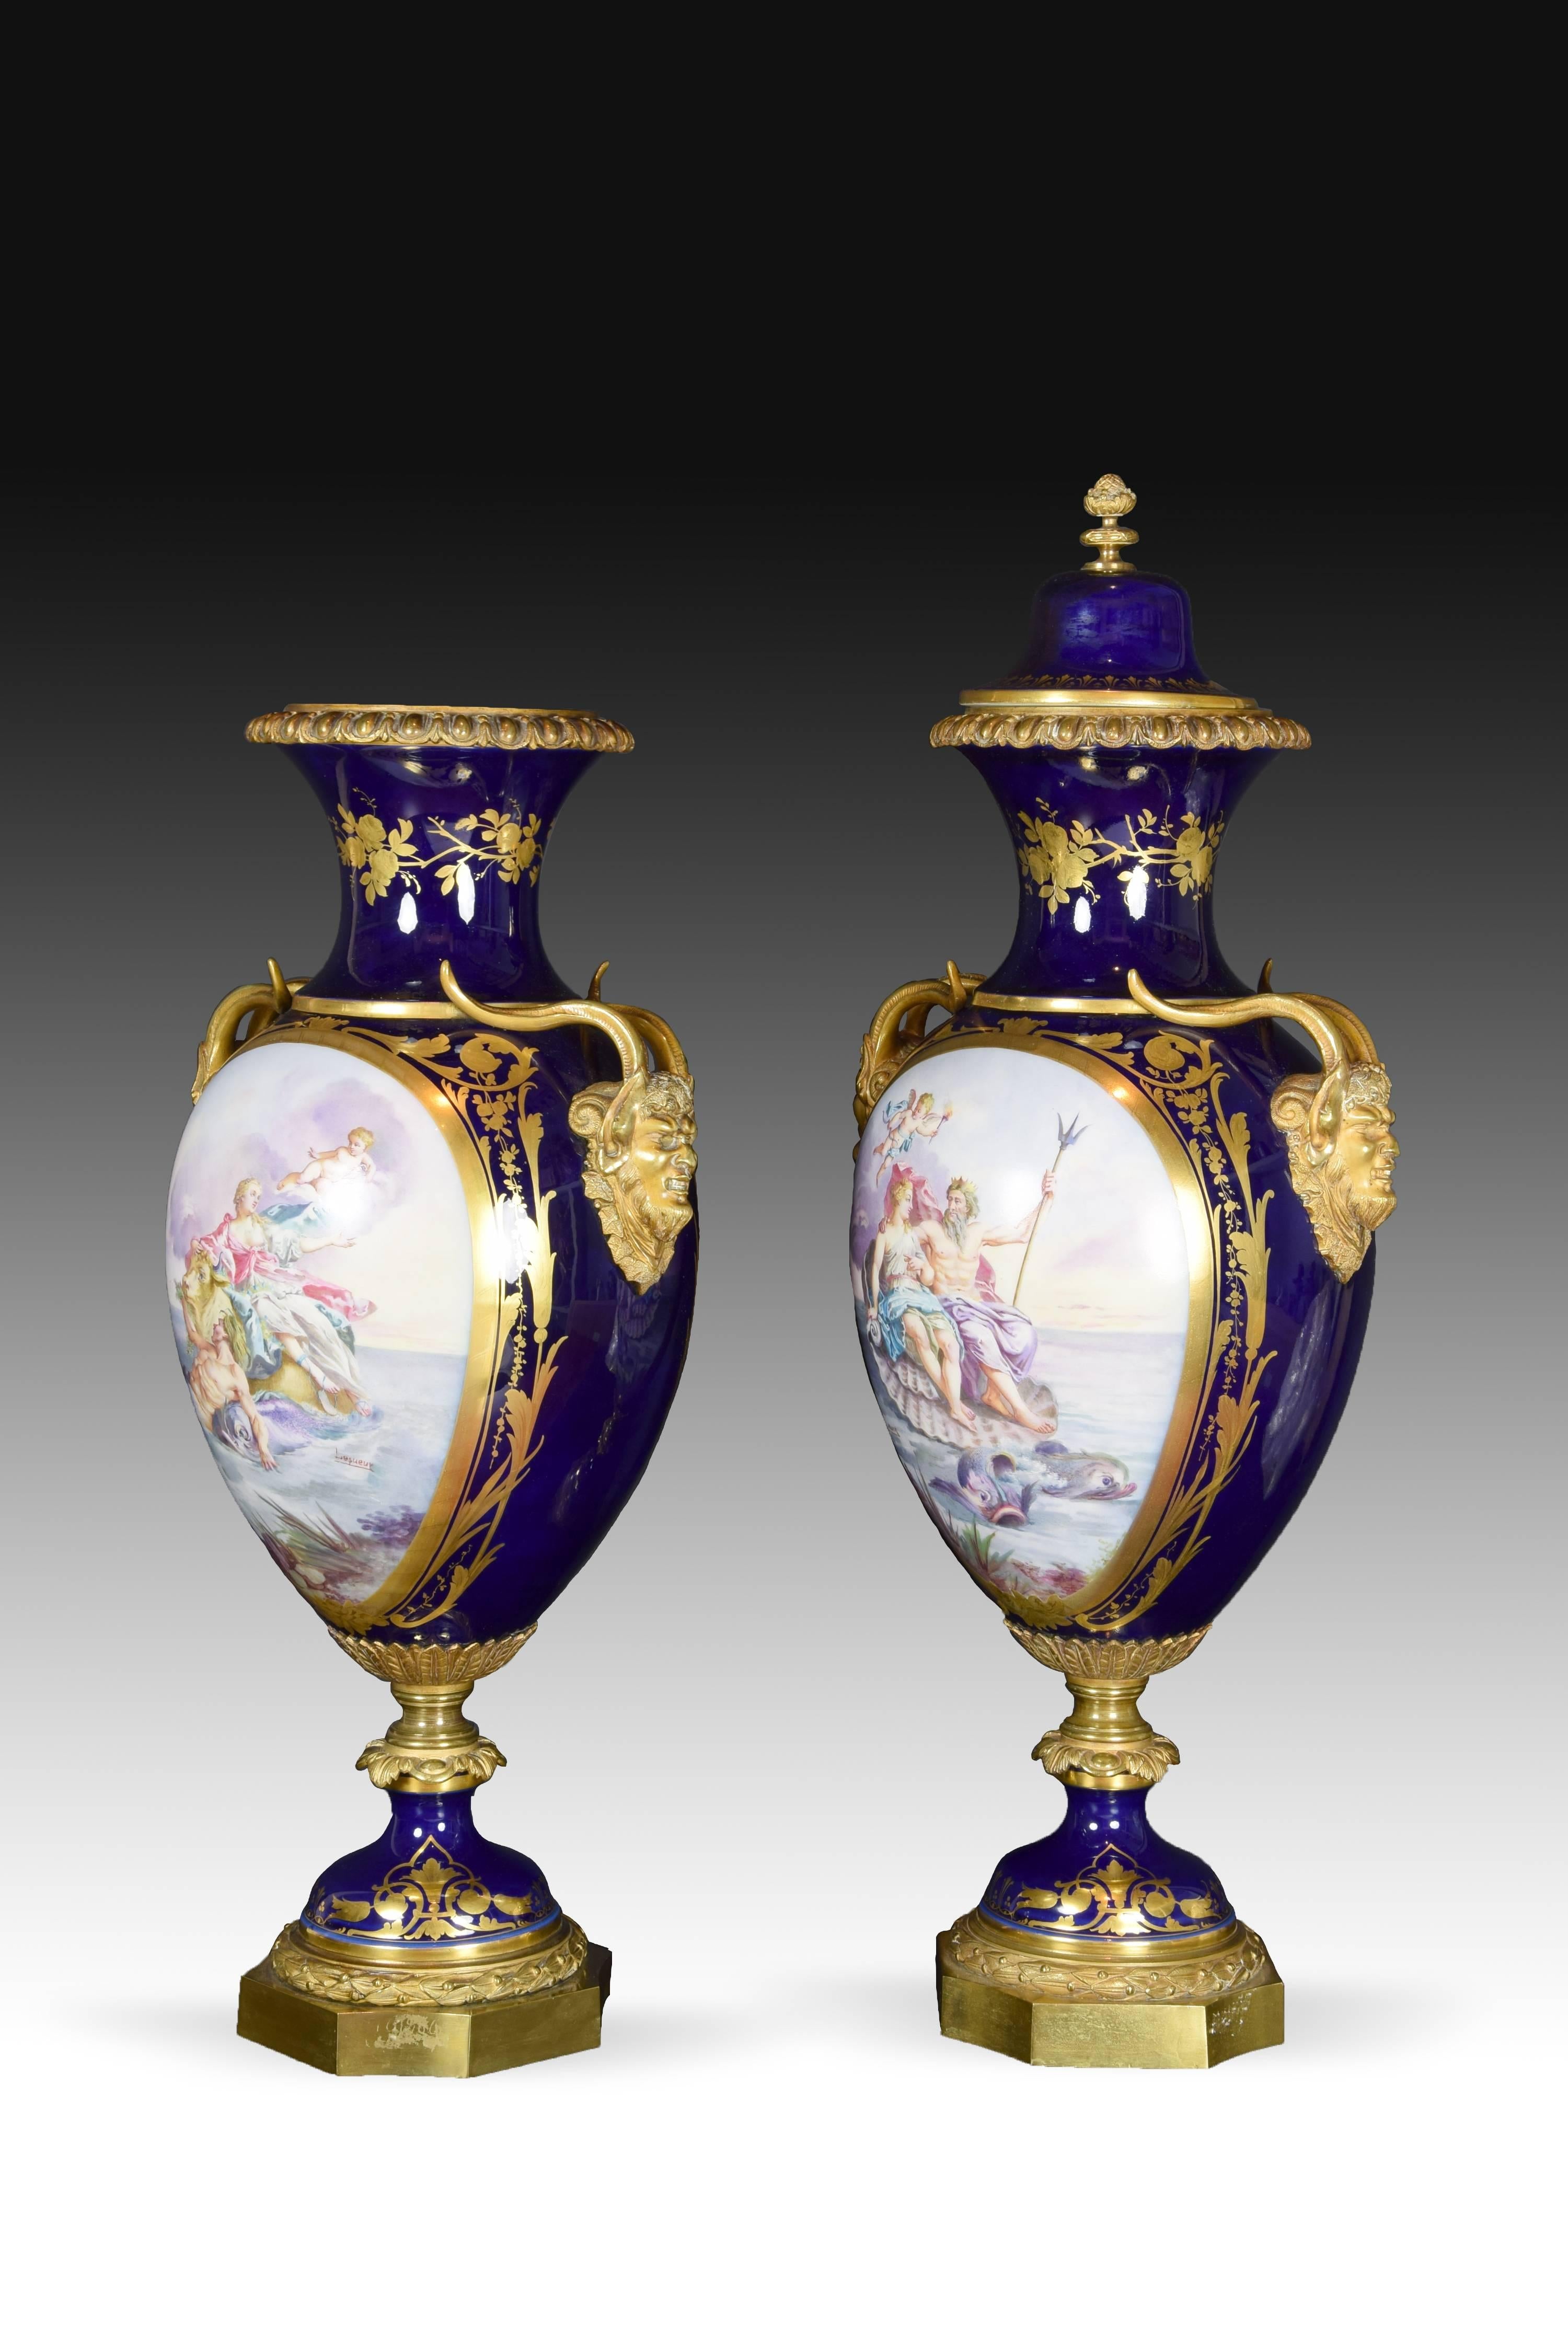 Blue cobalt porcelain and bronze pair of vases. Manufacture Nationale de Sèvres (France), 19th century. 
With scenes after Lesueur.
Both vases have the same shape and same decorative elements in gilded bronze applied to it. A polygonal base with a